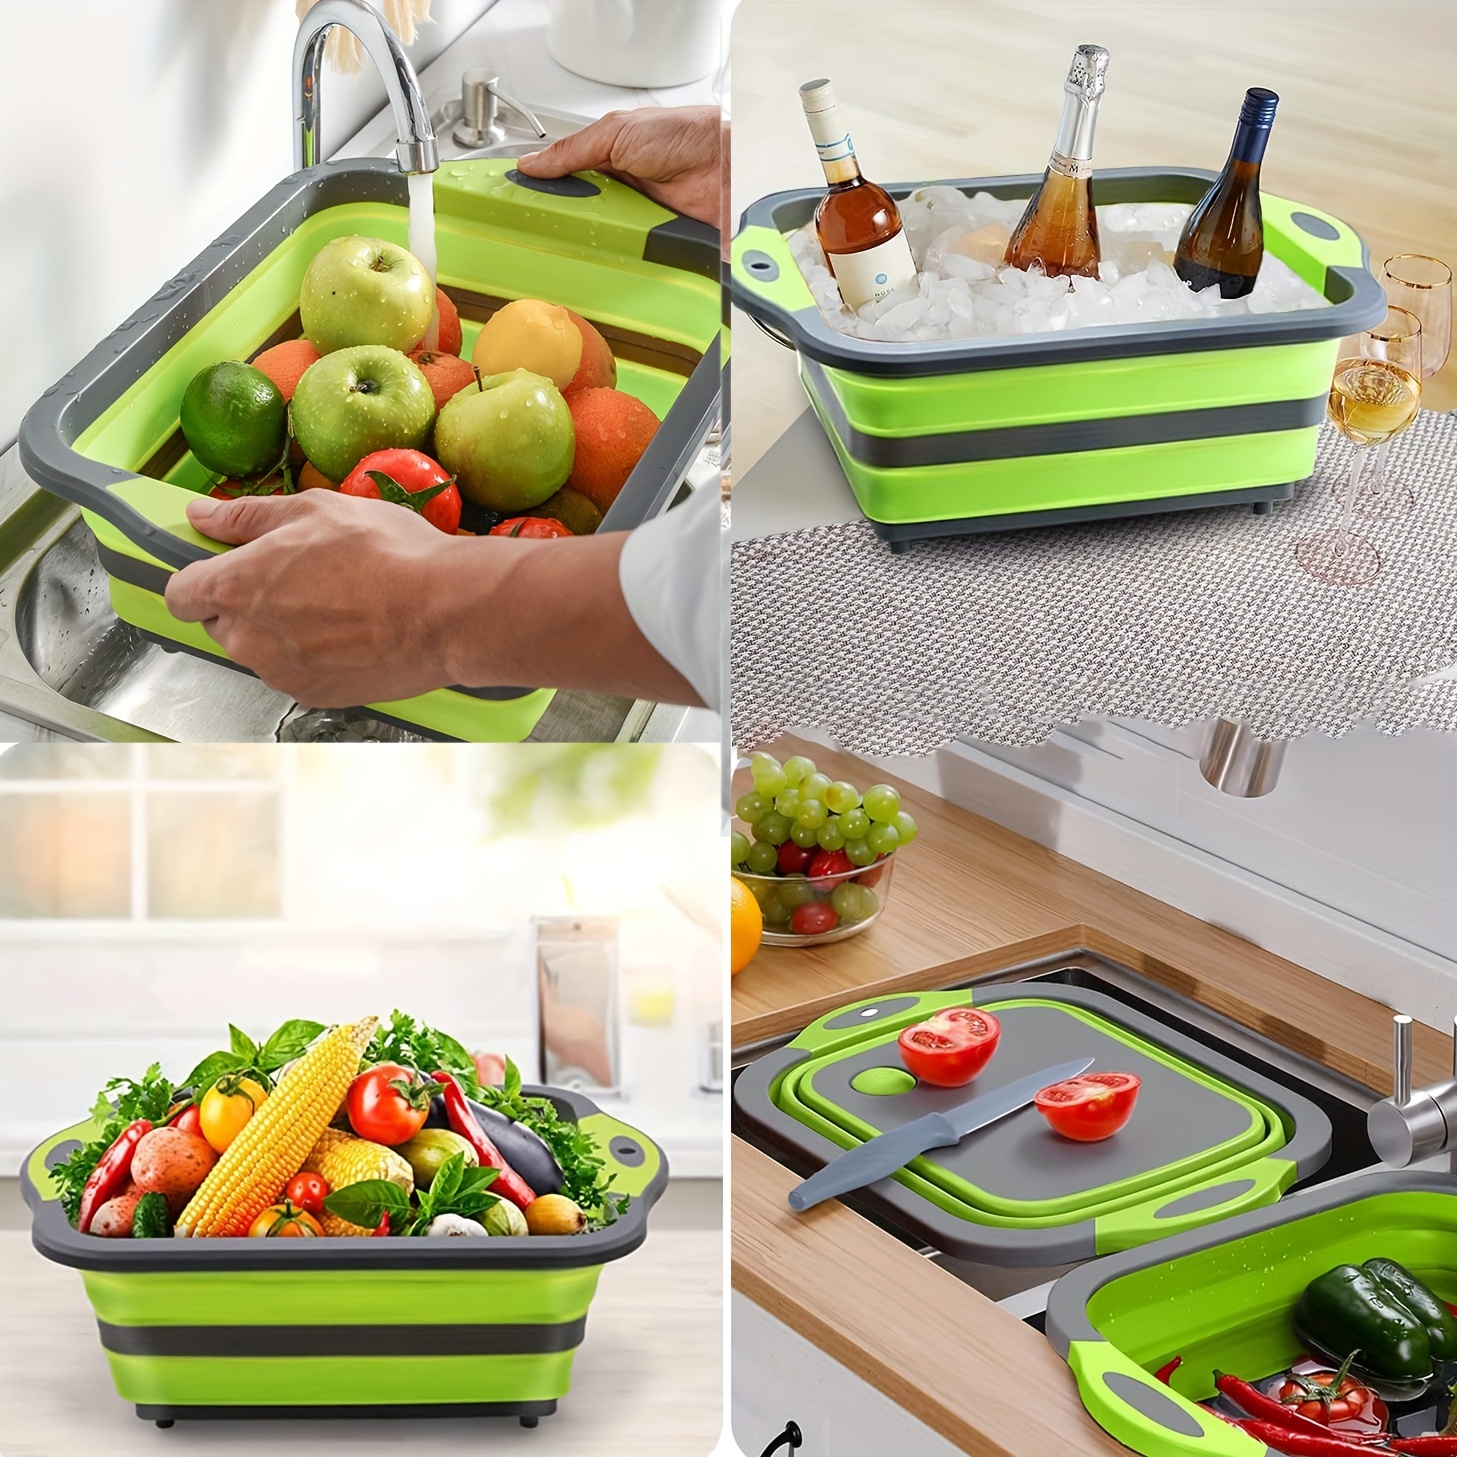 Folding Silicone Cutting Board Multifunctional Collapsible Sink Drain  Basket Washable Vegetables Strainer Kitchen Organizer